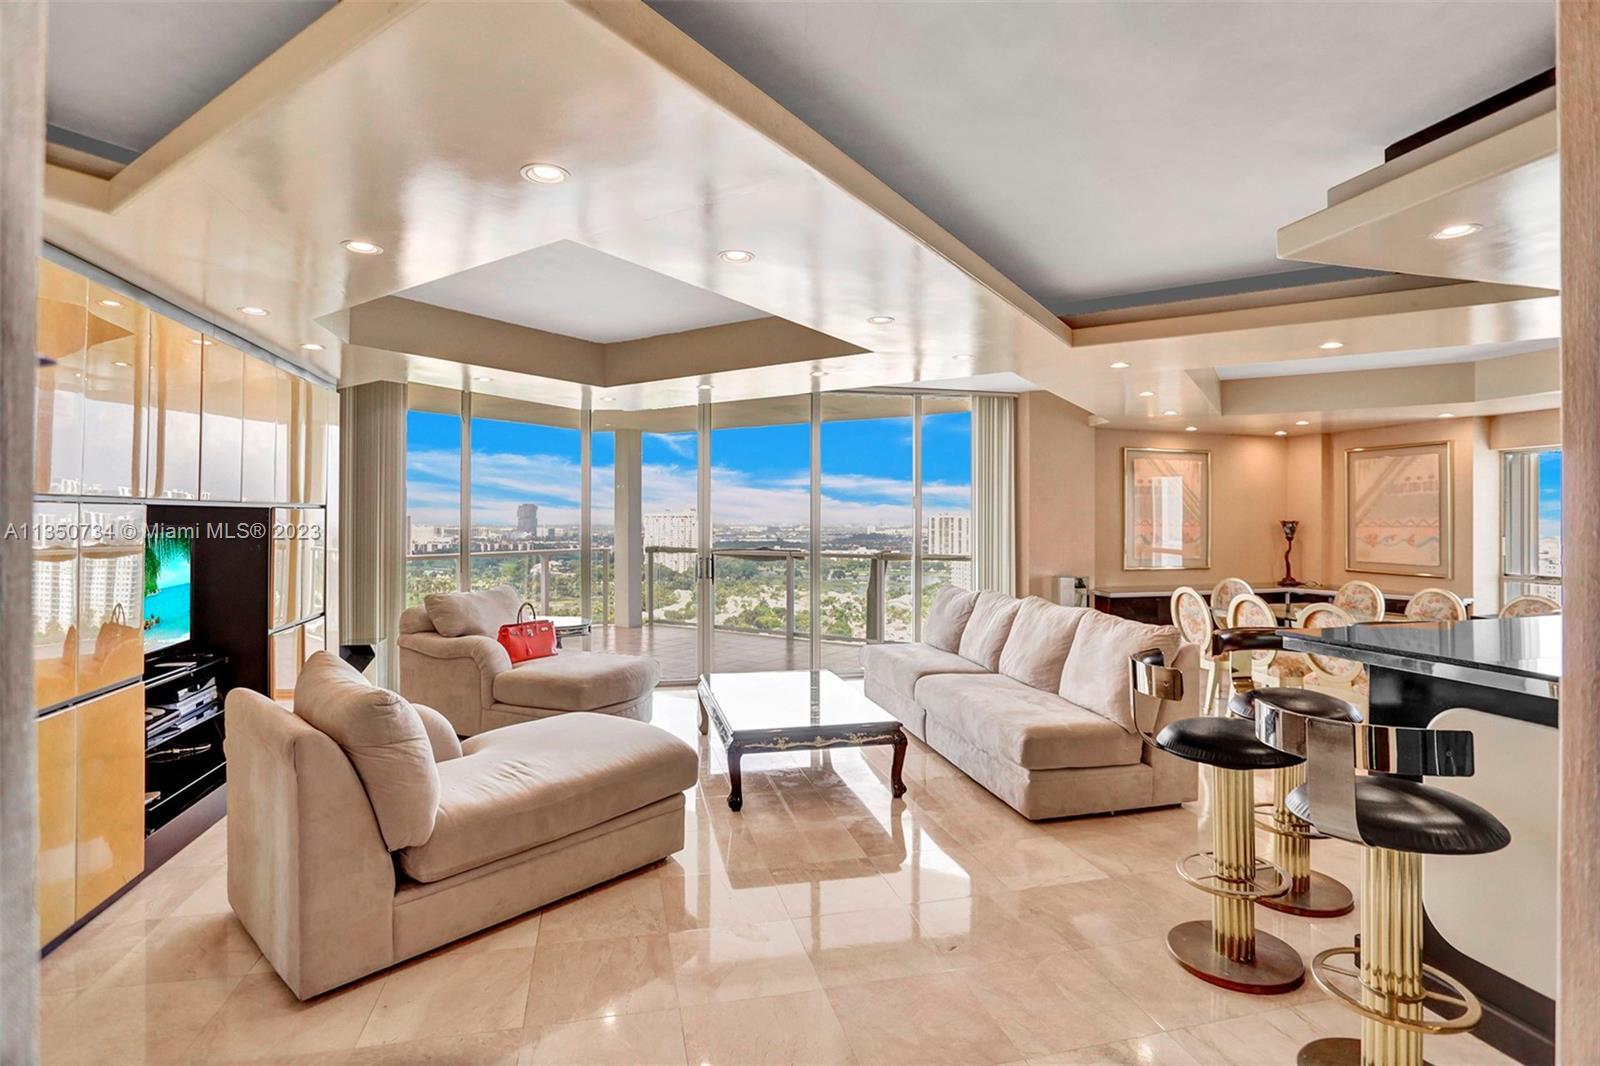 Looking for luxury living in Aventura, Florida? Look no further than this spacious 2-bedroom, 2.5-ba